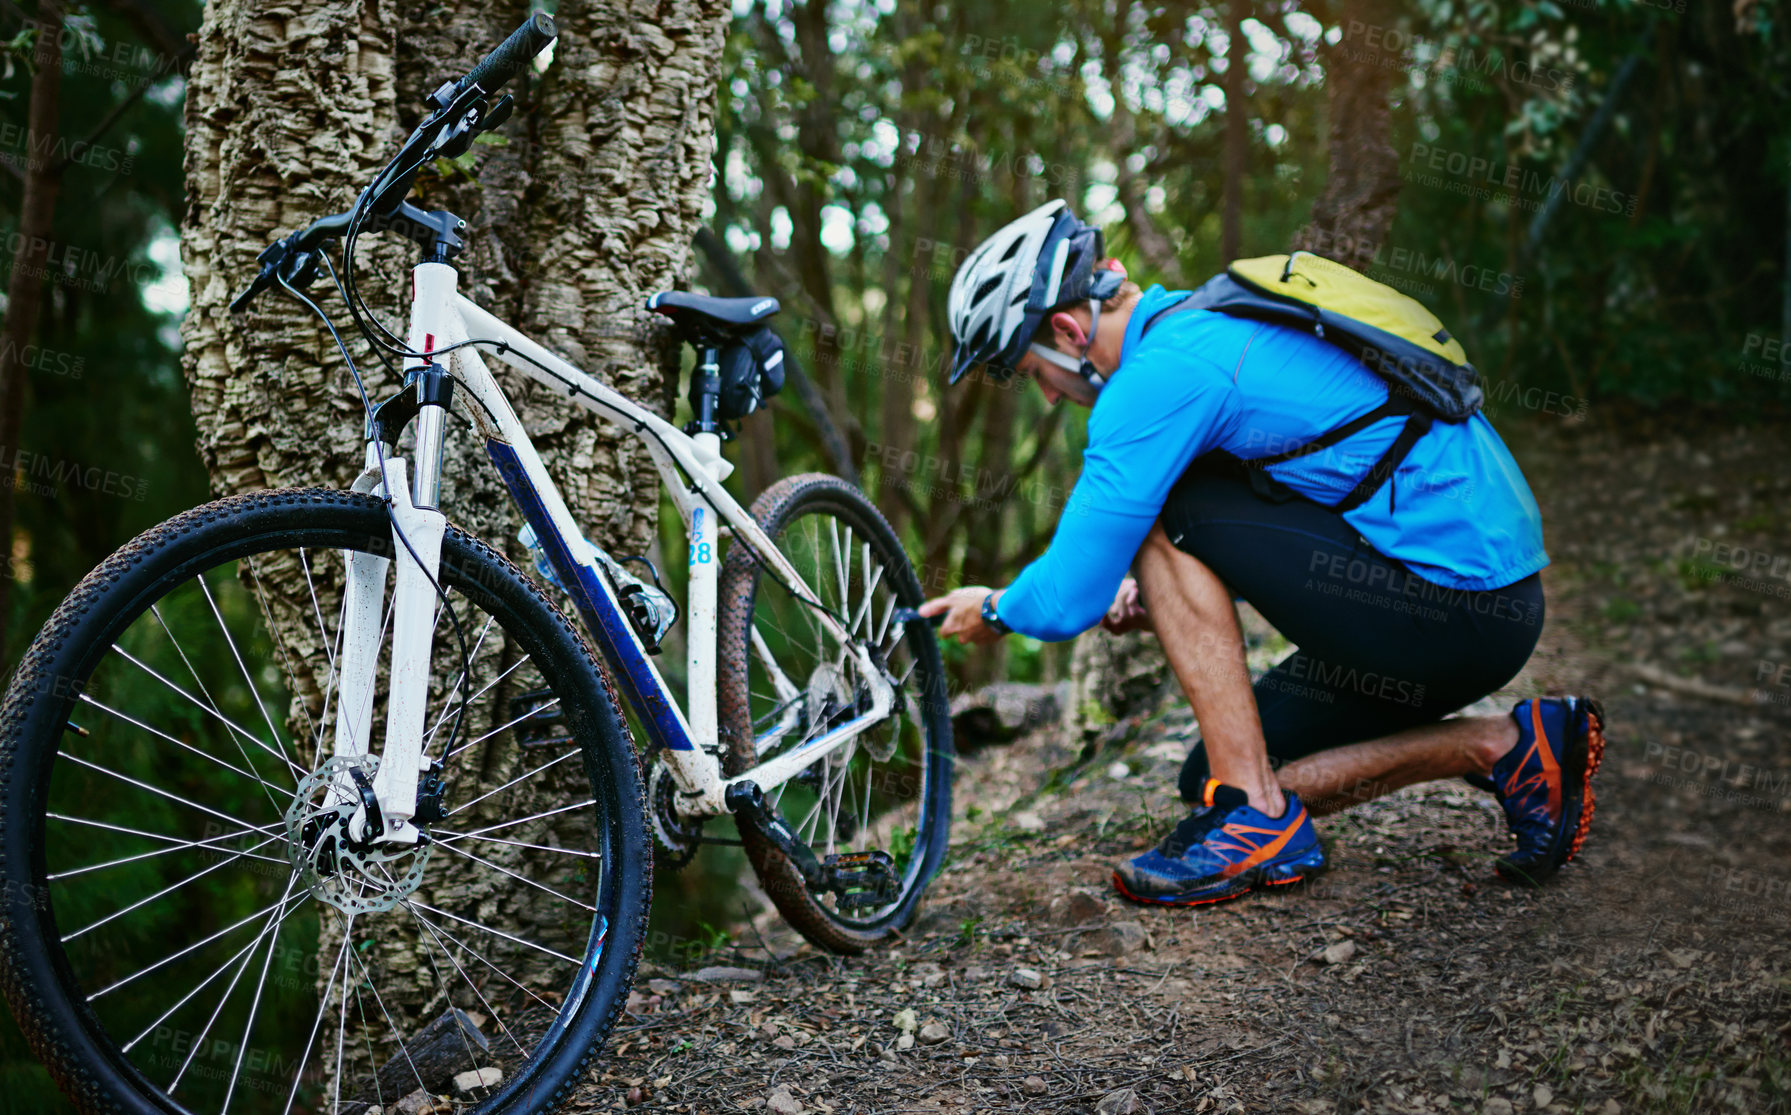 Buy stock photo Shot of a cyclist inflating the tires of his mountain bike while out for a ride